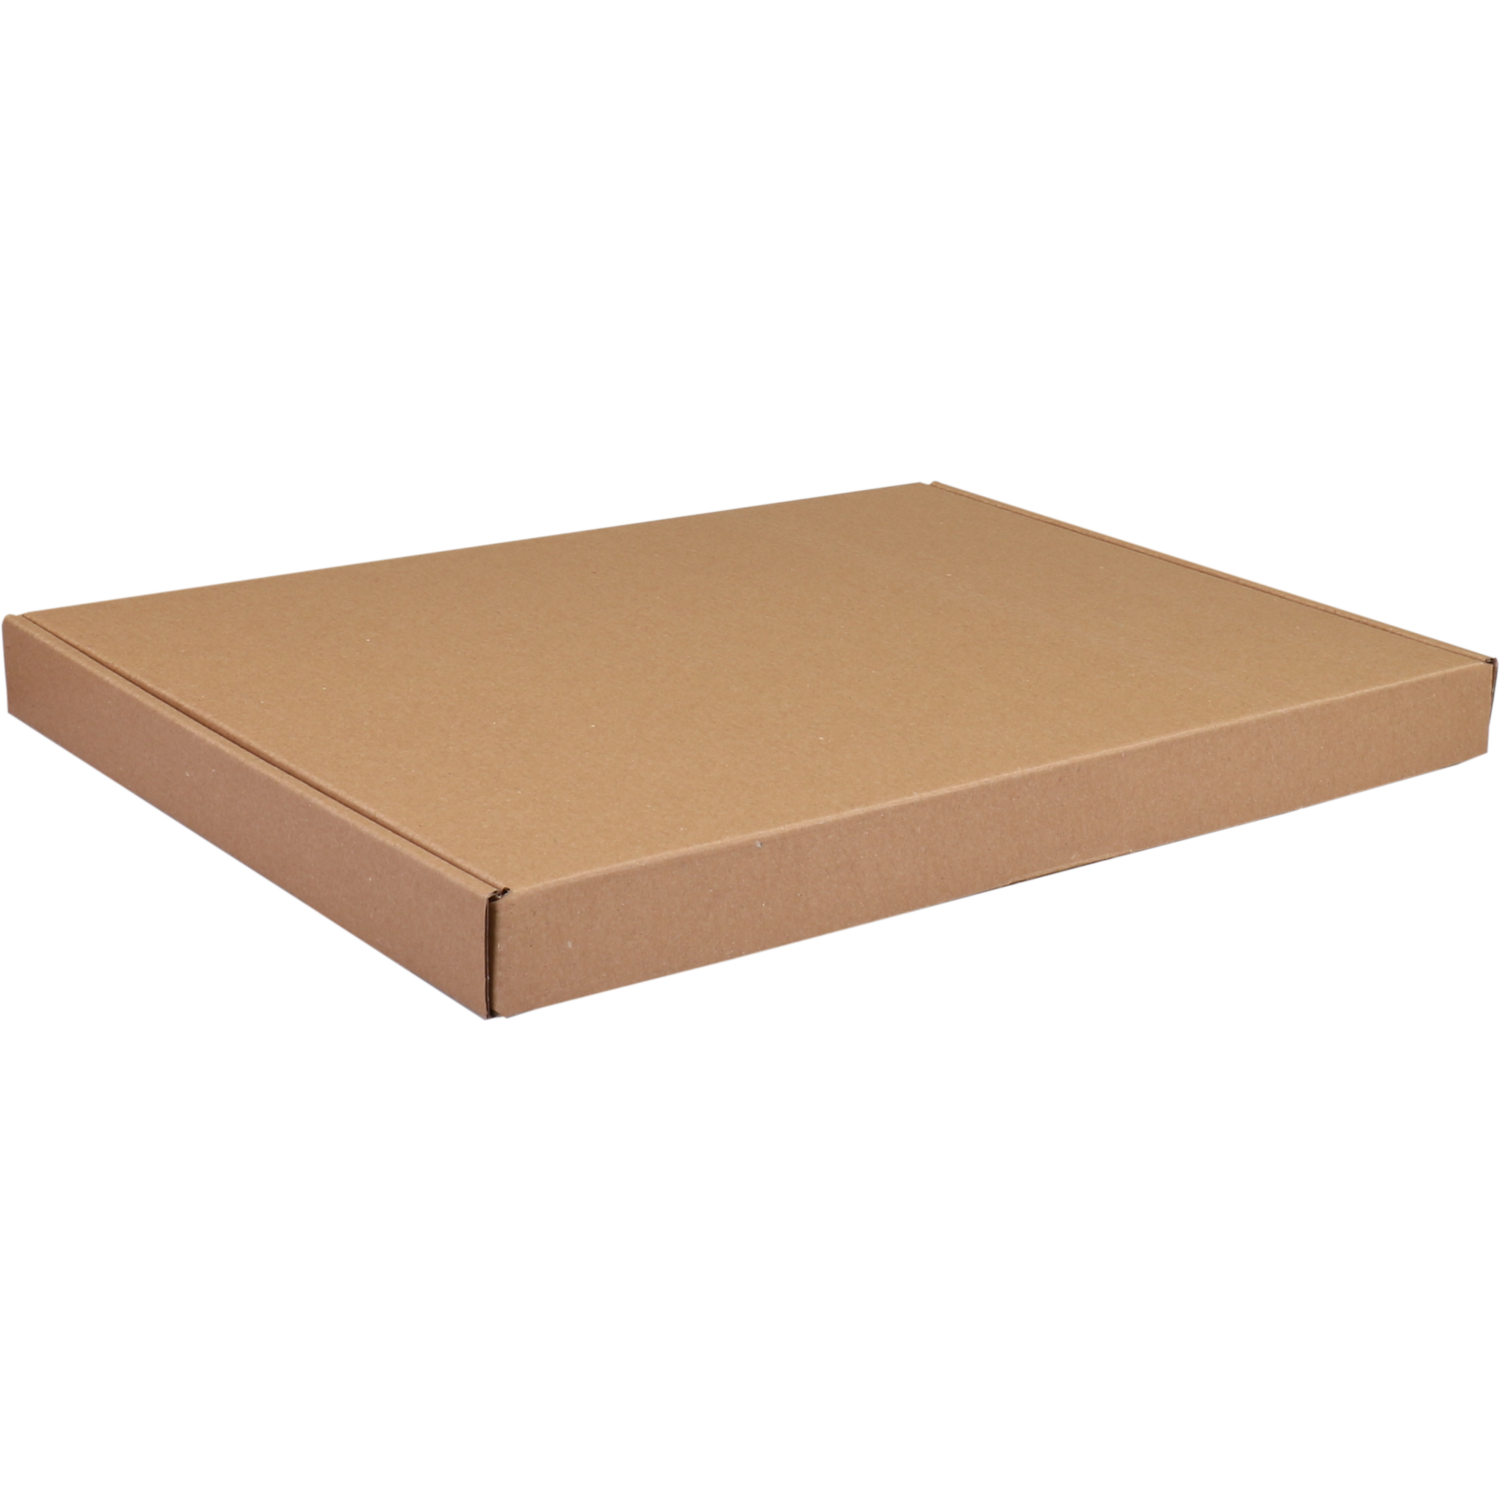  Fits through letterbox - box, A4+, corrugated cardboard, 345x255x27mm, with flap, brown  1